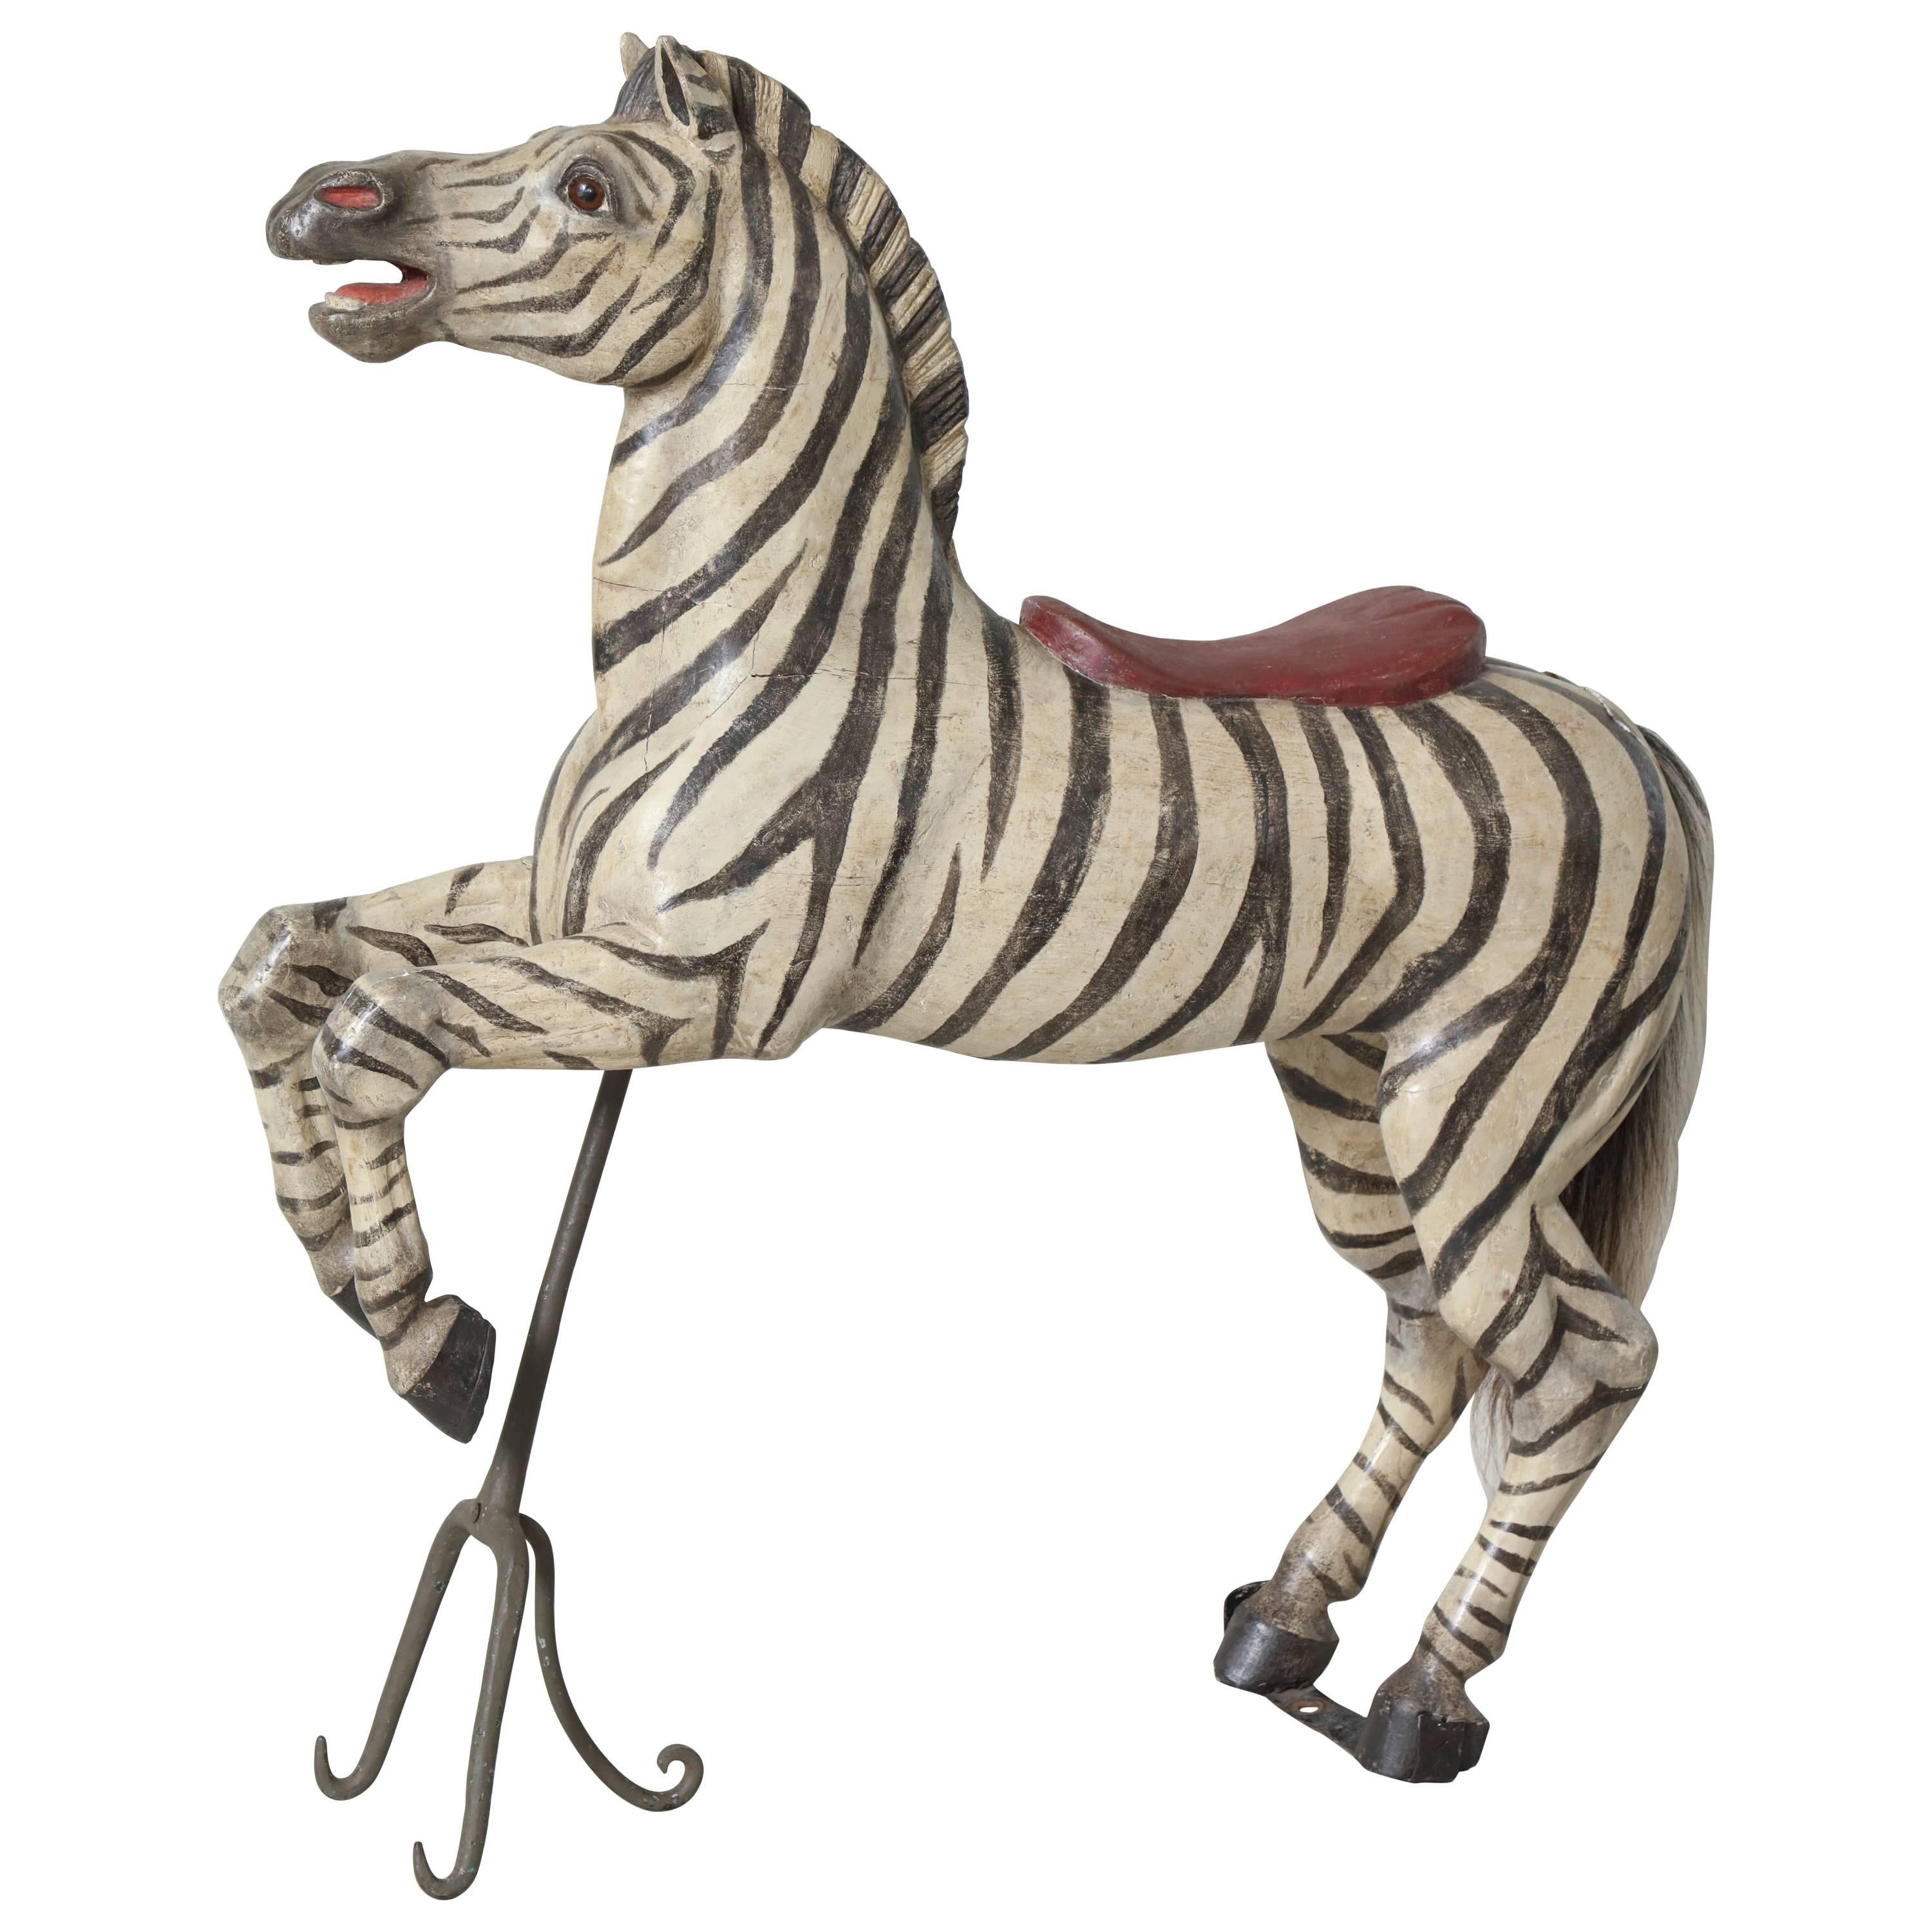 A late 19th century-early 20th century carousel zebra by eminent creater Karl Muller in carved, painted wood. Ex-coll. Muller/Thummel studio in Molbitz, Germany, thence Fabienne and Francois Marchal collection, Gerardmer, France, inventory no. 54.